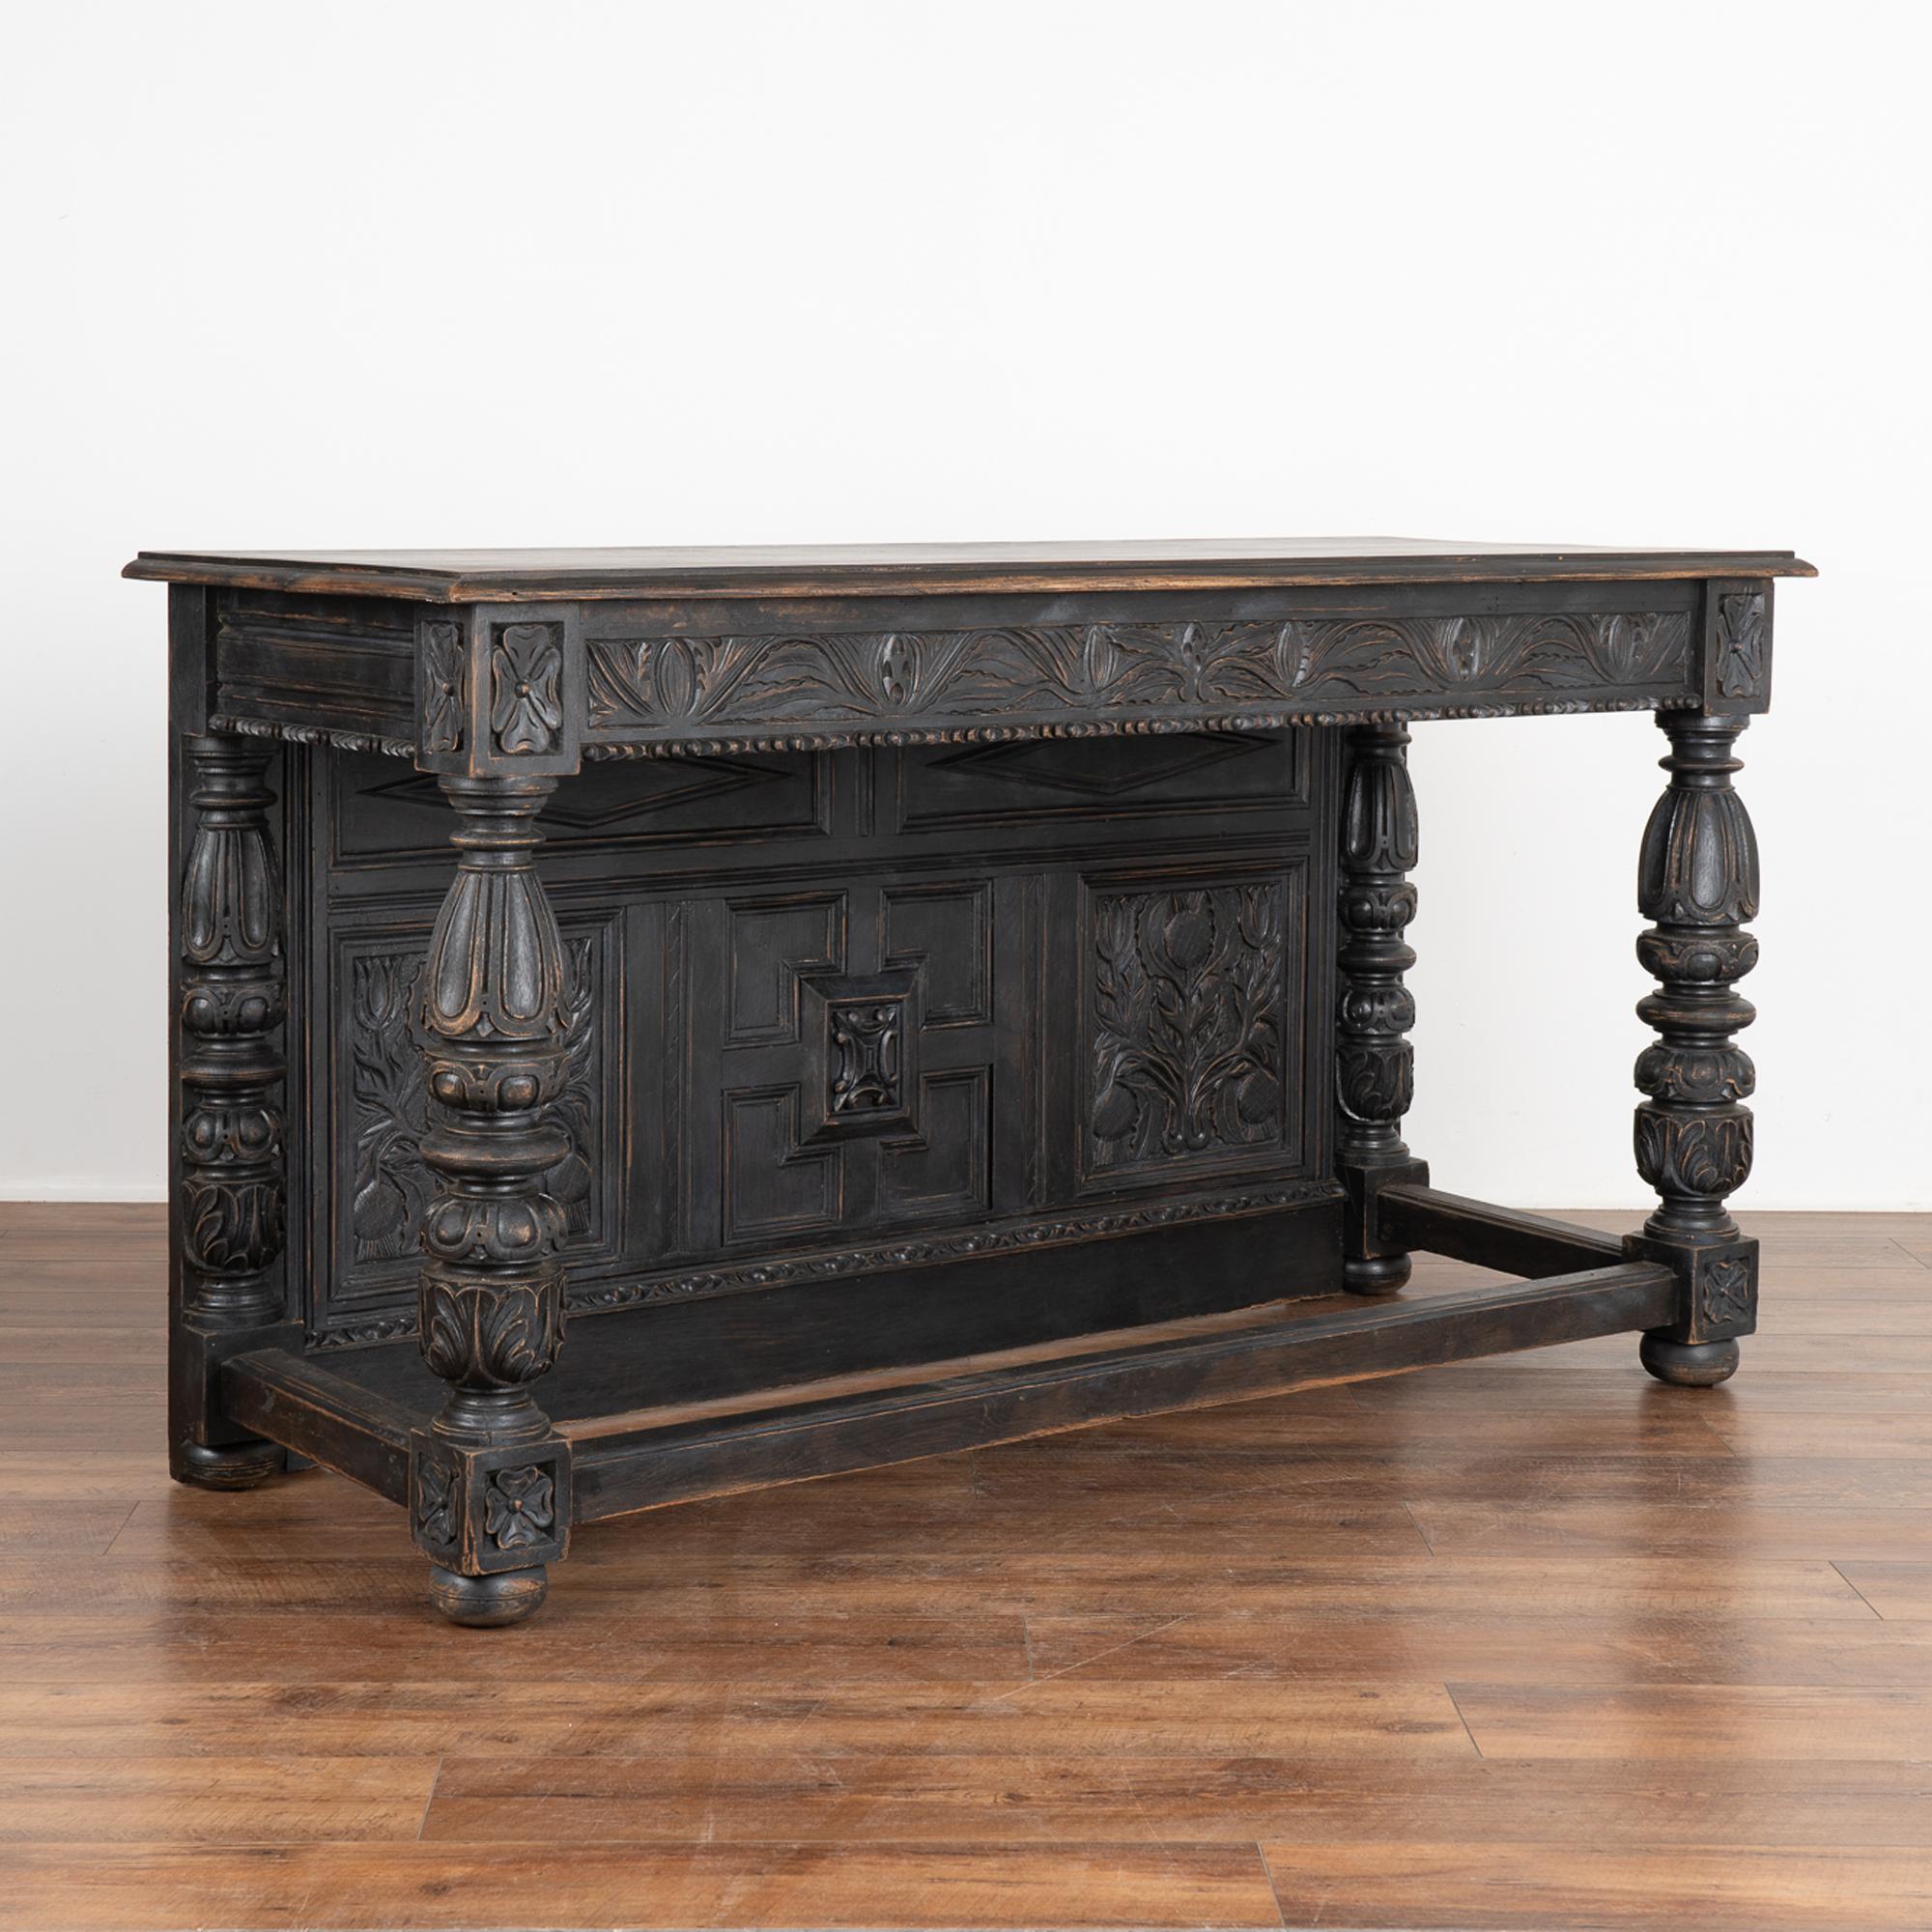 Heavily carved oak console, can be used as an impressive buffet, counter or standing bar.
Note the extensive hand-carving throughout which is complimented by the newer, professionally applied black painted finish. Lightly distressed, it enriches the